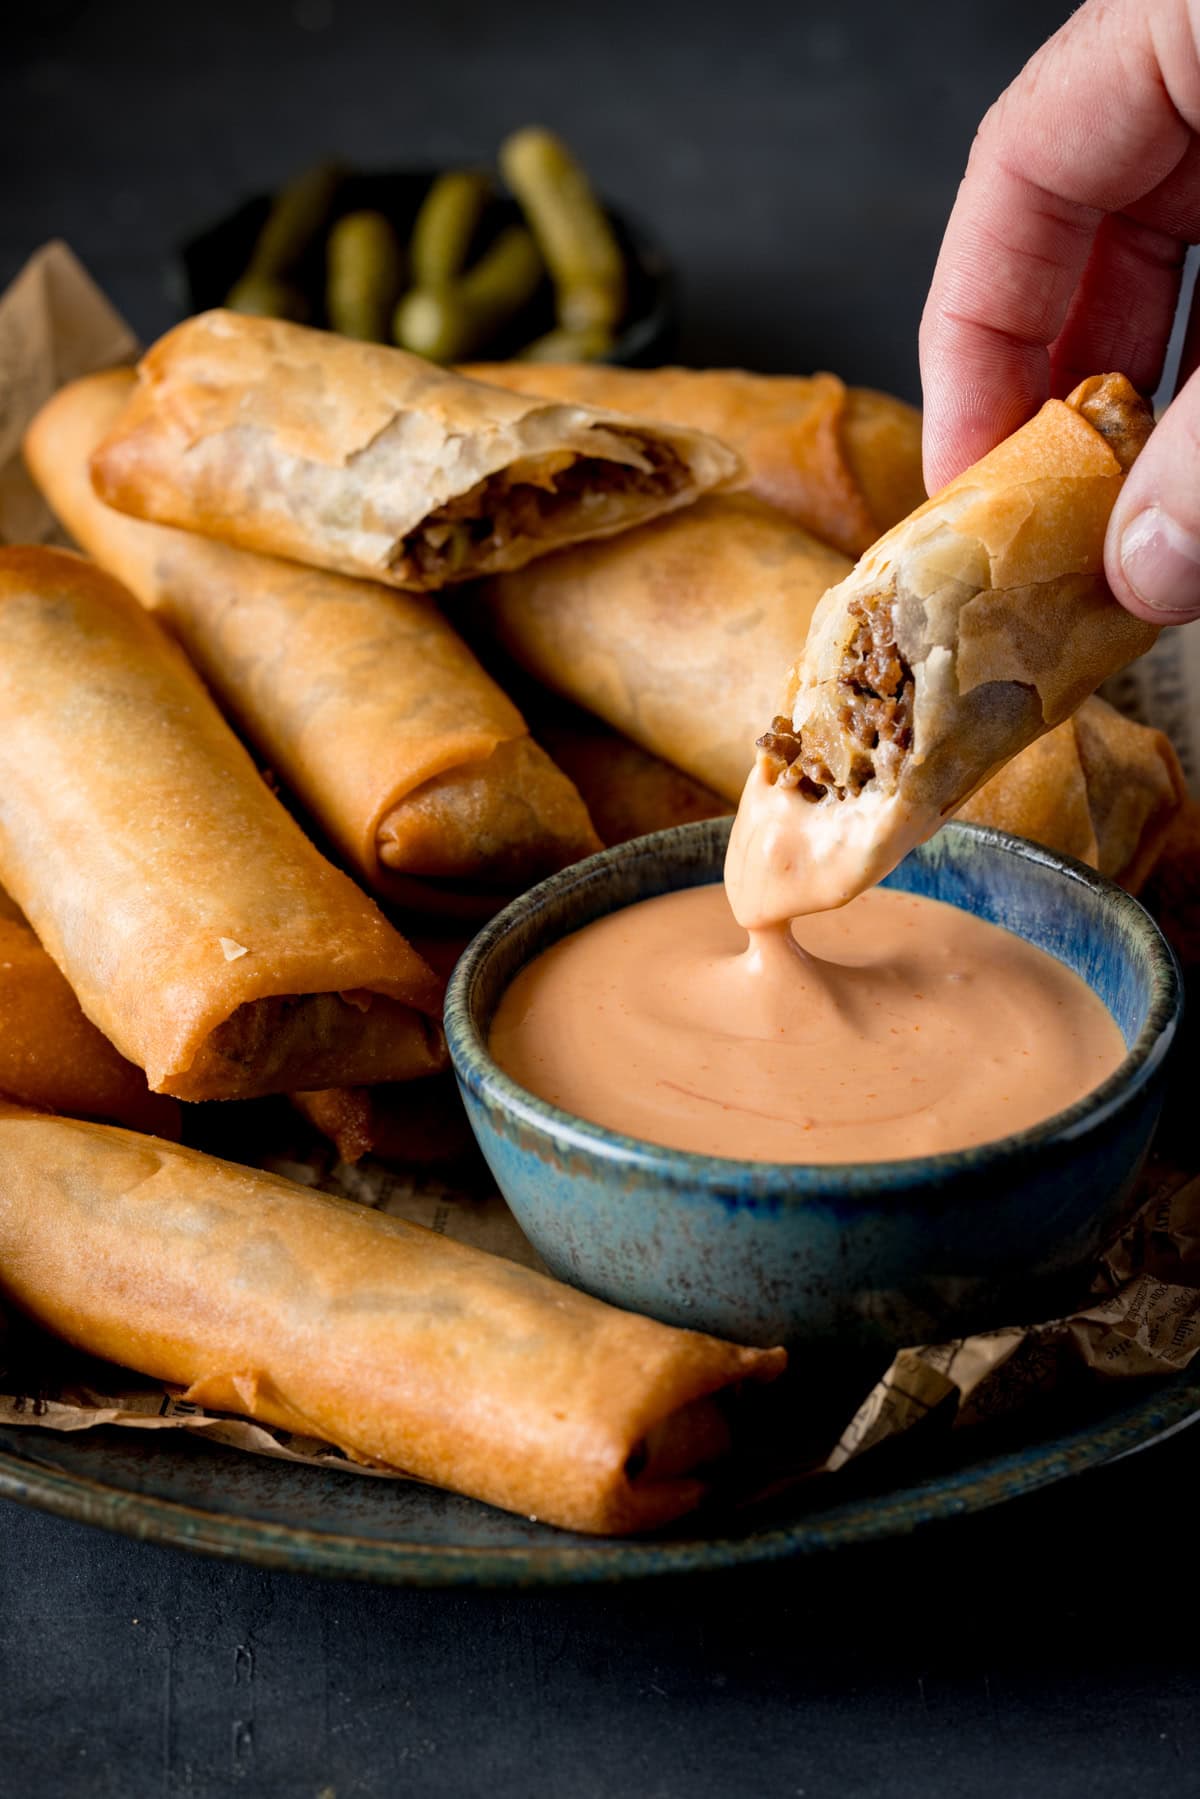 A tall shot of Cheeseburger Spring Rolls. There are 6 whole spring rolls stacked horizontally next to each other, and on top of the stack (in the middle of the image) there is another spring roll that has been cut in half and one of the halves is arranged so you can see the filling. The other half is being held by a hand on the right of the screen and is being dipped into a dark blue dish, filled with burger sauce. The dark blue dish with burger sauce is on the same dish as the spring rolls, and the spring rolls are stacked around it. This is all set on a dark blue plate, which is lined with a brown newspaper. And in the top left of the background, you can slightly see another blue dish with pickled gherkins in it. This is all set on a navy blue background.